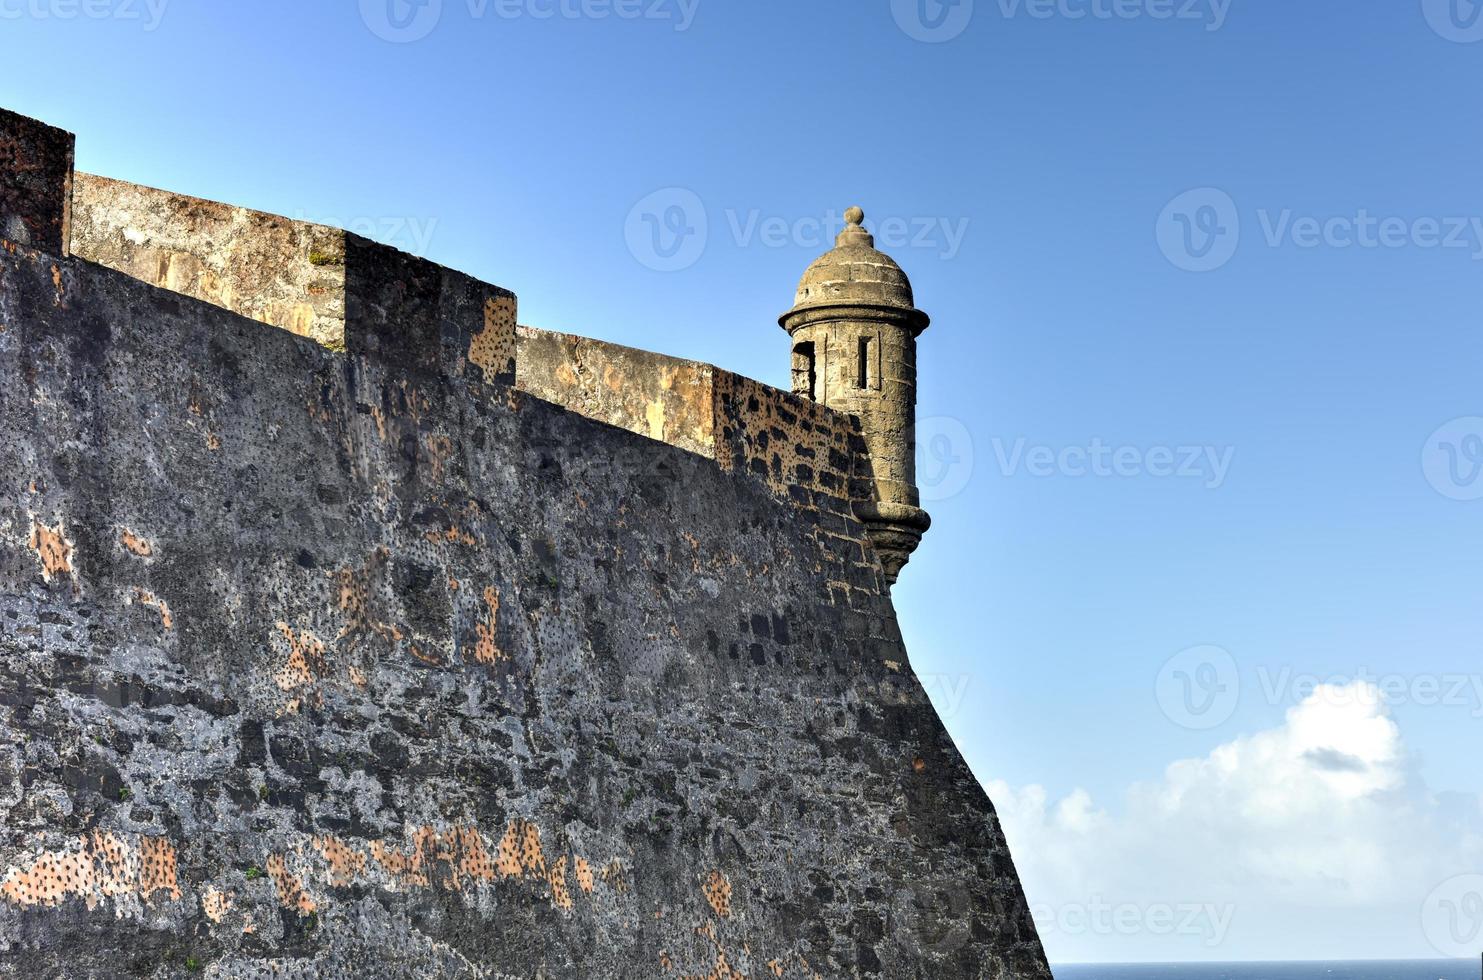 Castillo de San Cristobal in San Juan, Puerto Rico. It is designated as a UNESCO World Heritage Site since 1983. It was built by Spain to protect against land based attacks on the city of San Juan. photo